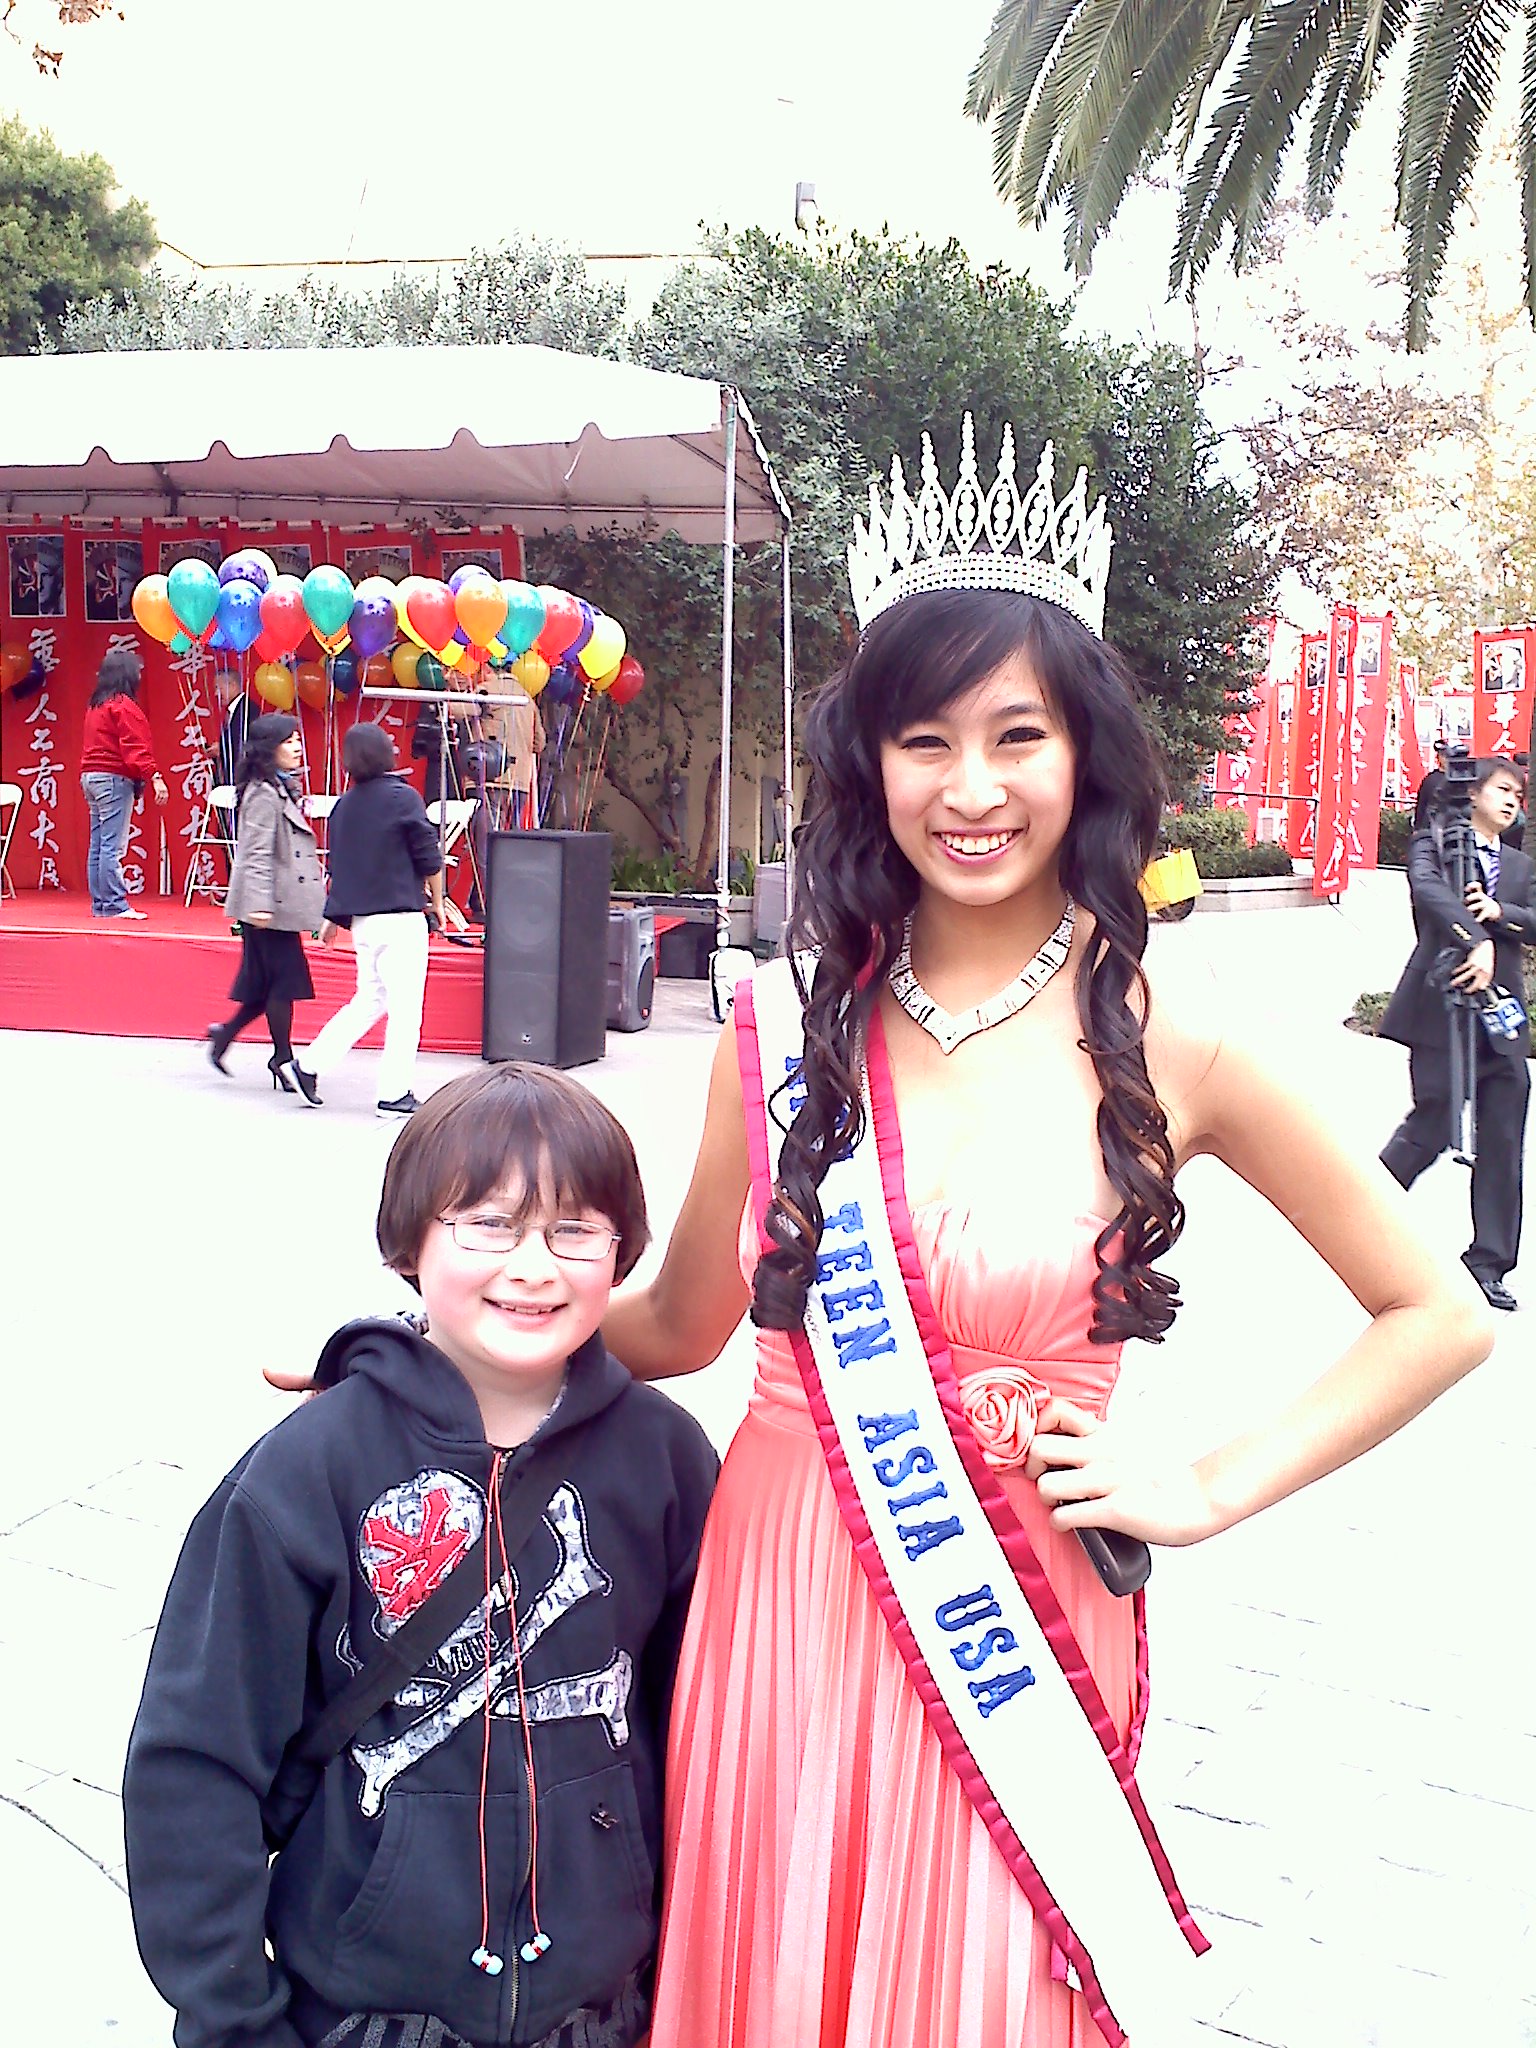 Matthew Jacob Wayne paid a visit to his God Sister, Miss Teen Asia USA, Meeghan Henry, at the American Asian Festival in Pomona, CA in February, 2012.